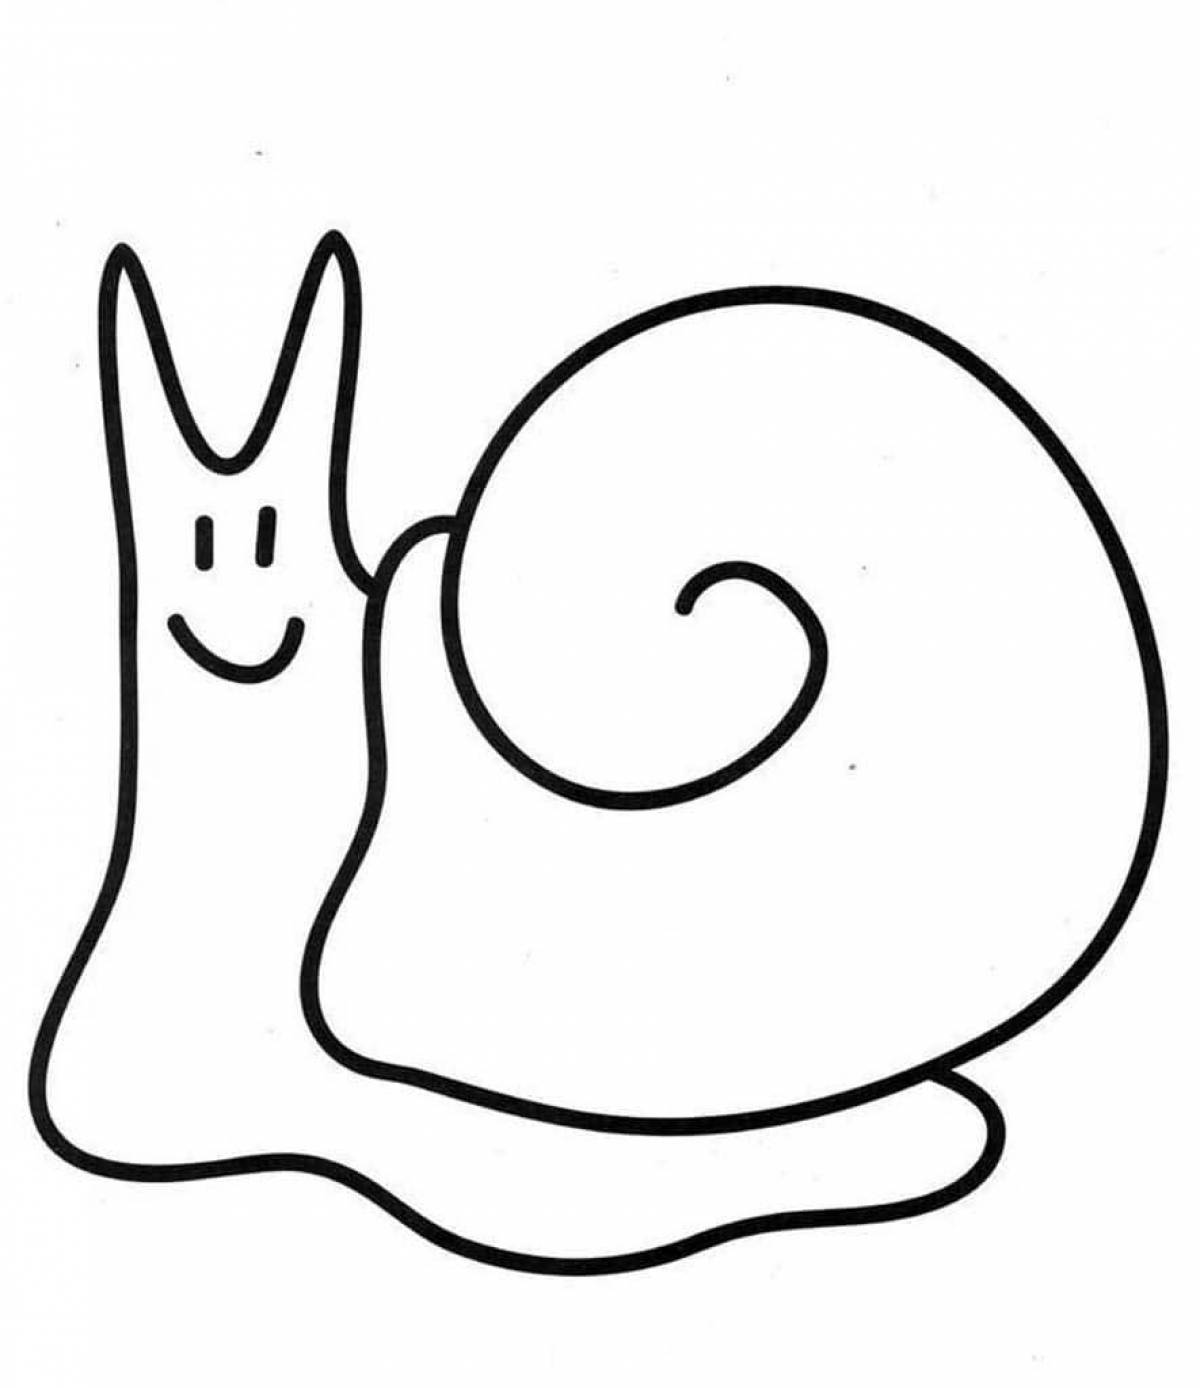 Colouring adorable snail for kids